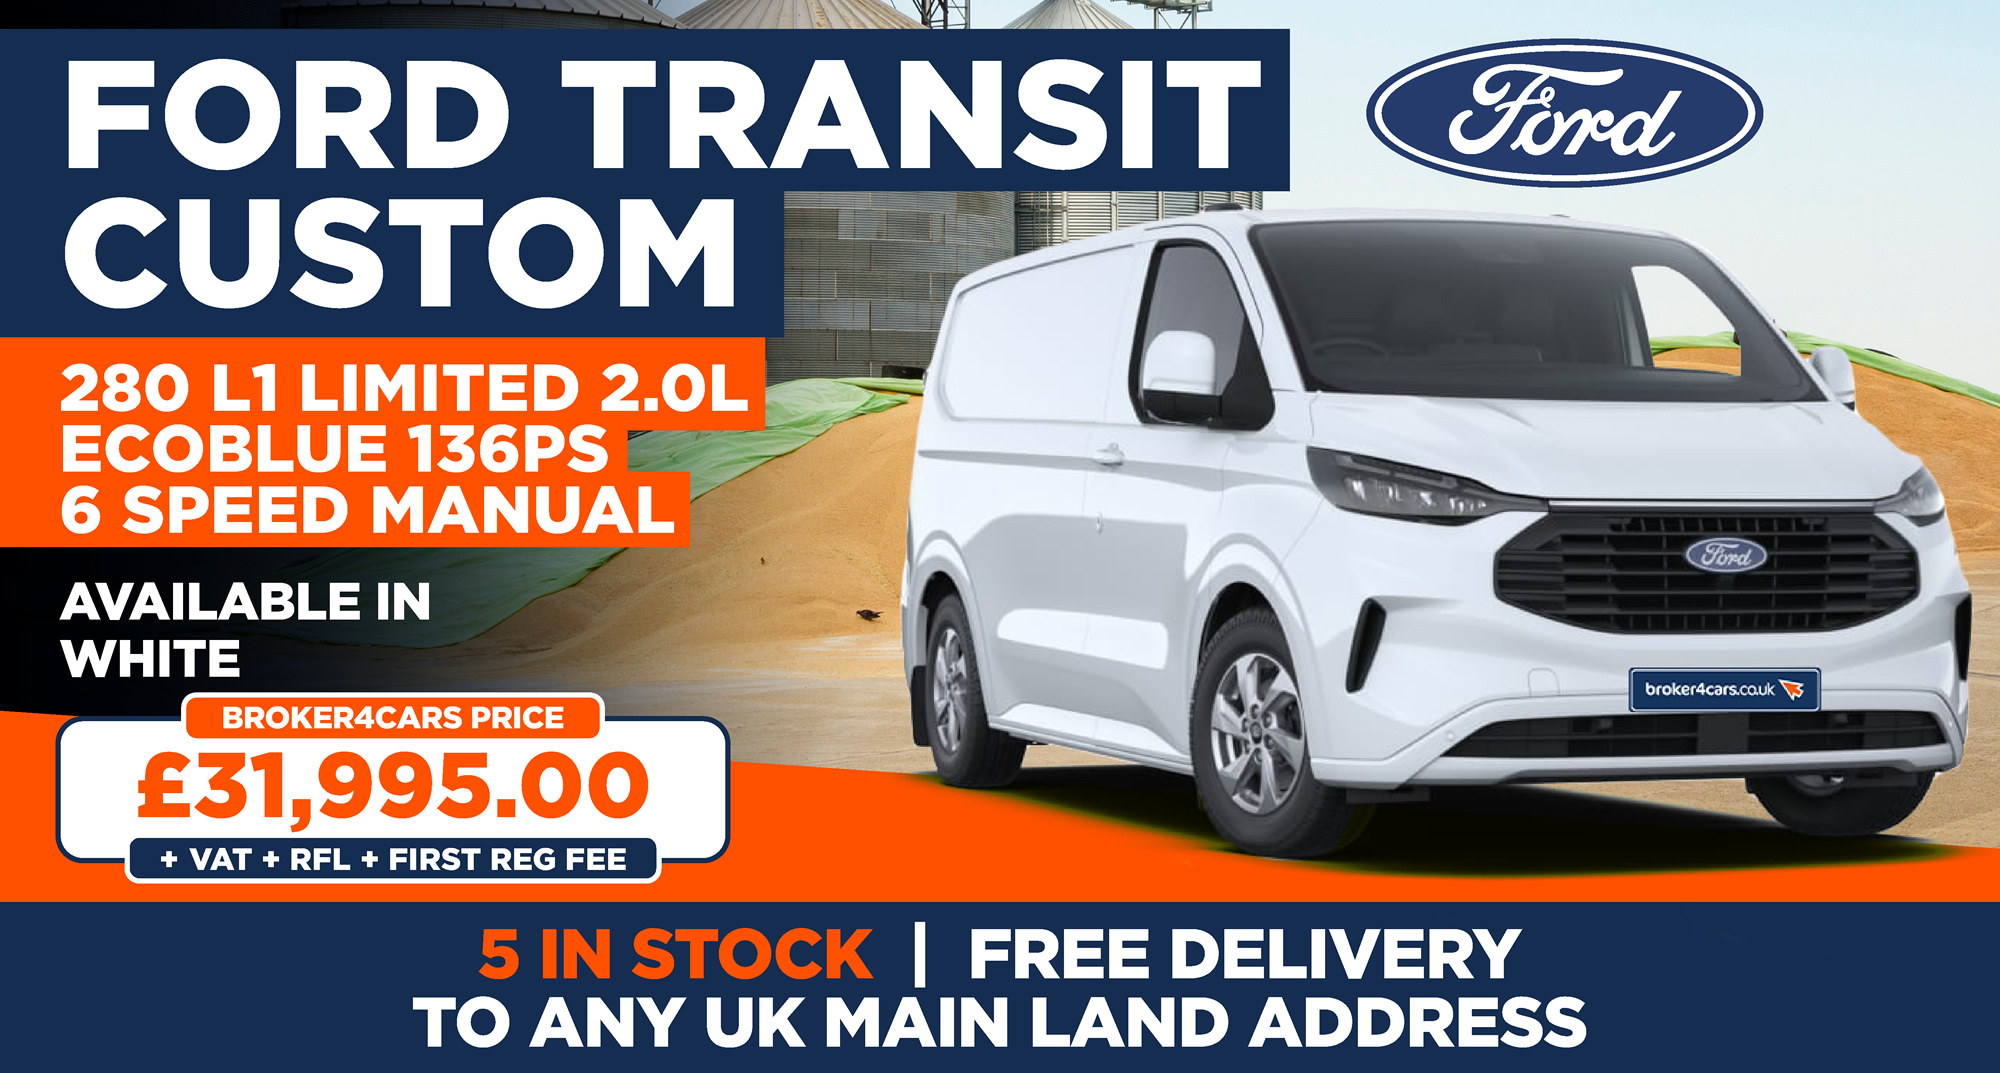 FORD TRANSIT CUSTOM 280 L1 Limited 2.0l EcoBlue 136ps 6 speed manual WhiteALL IN STOCK WITH FREE DELIVERY. 5 in Stock. All above prices are + VAT + RFL + 1st Reg Fee